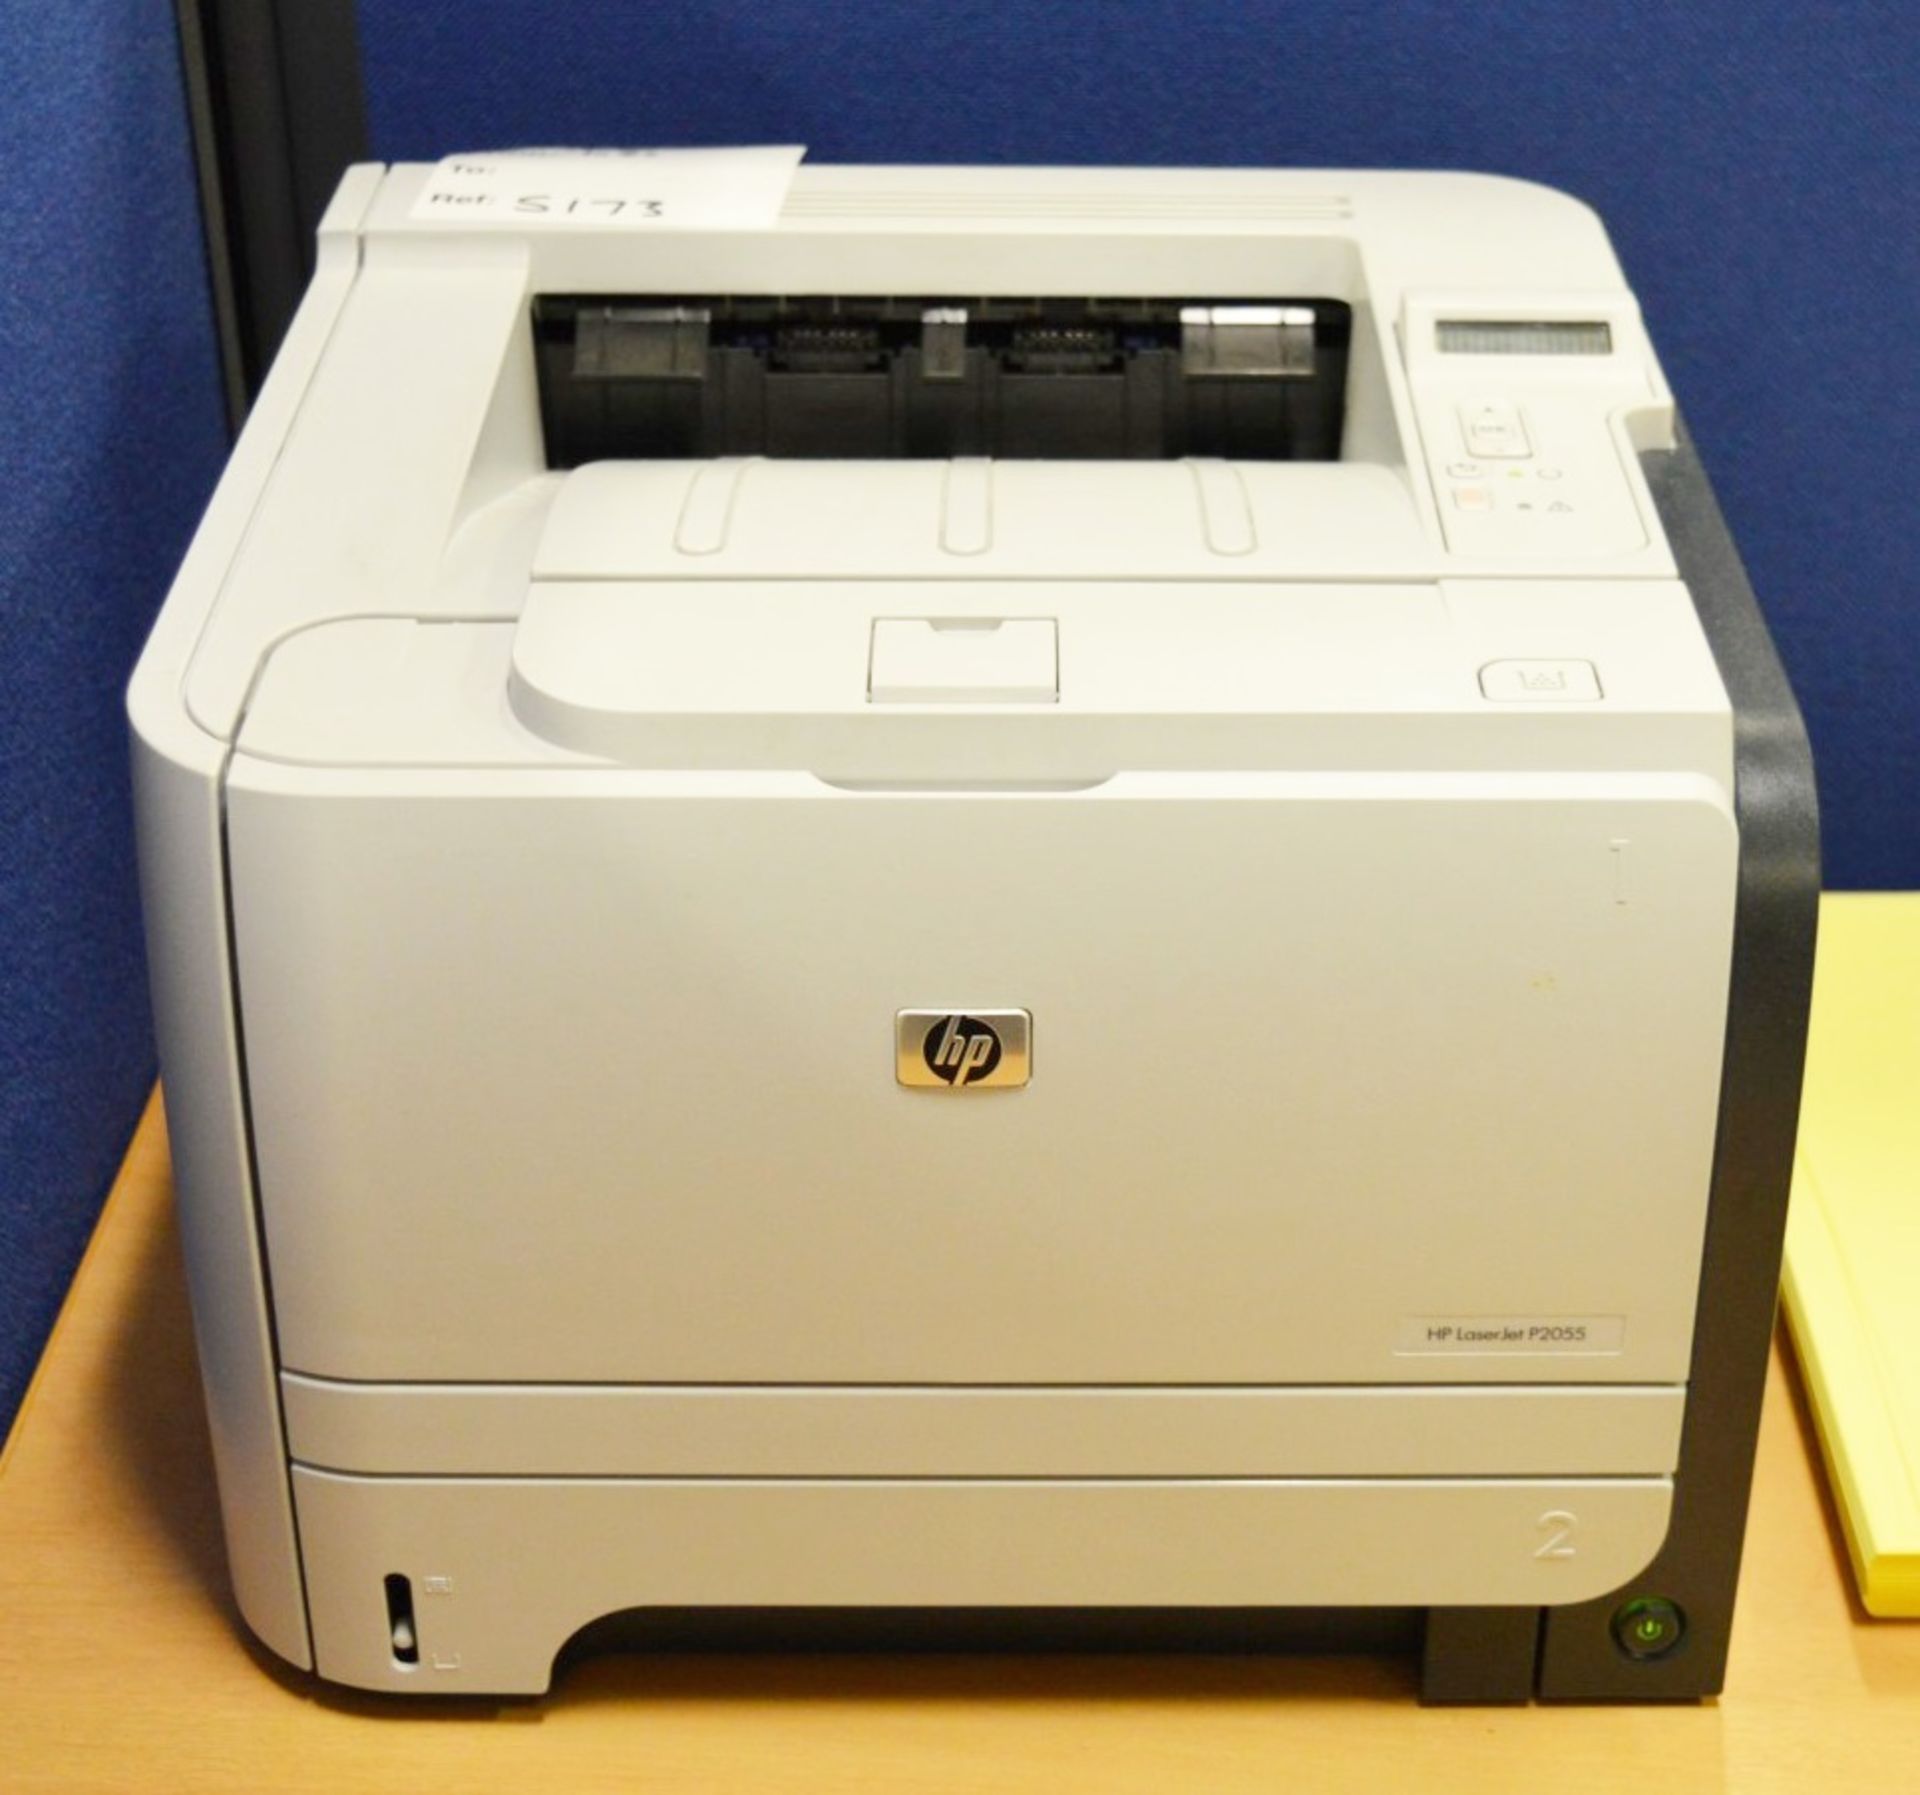 1 x HP Laserjet P2055 Mono Laser Printer - Ideal For Home or Office Computers - Please Note That The